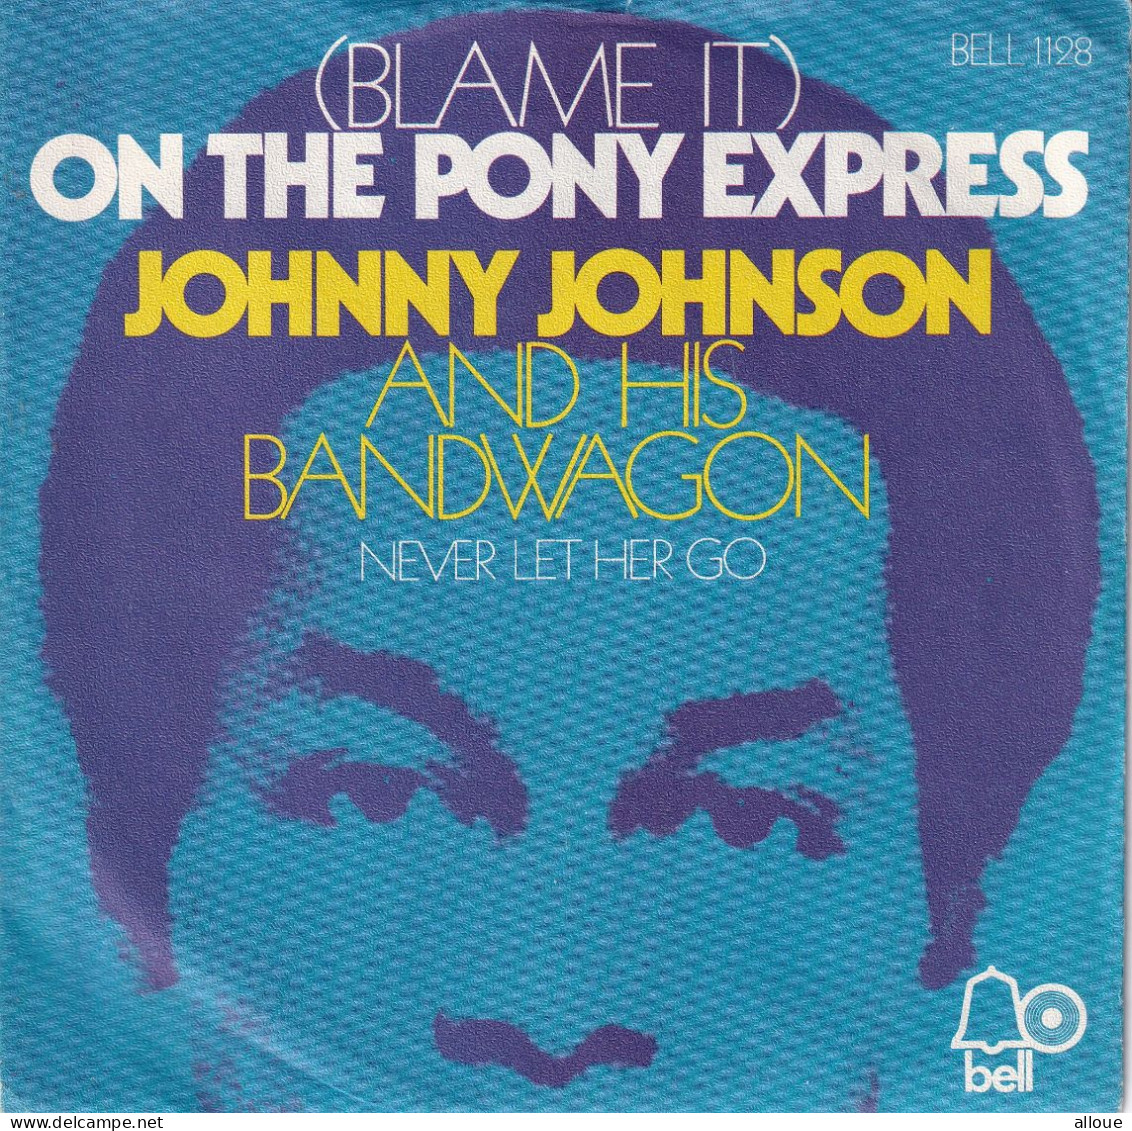 JOHNNY JOHNSON AND HIS BANDWAGON - GERMANY SG  - (BLAME IT) ON THE PONY EXPRESS + NEVER LET HER GO - Soul - R&B